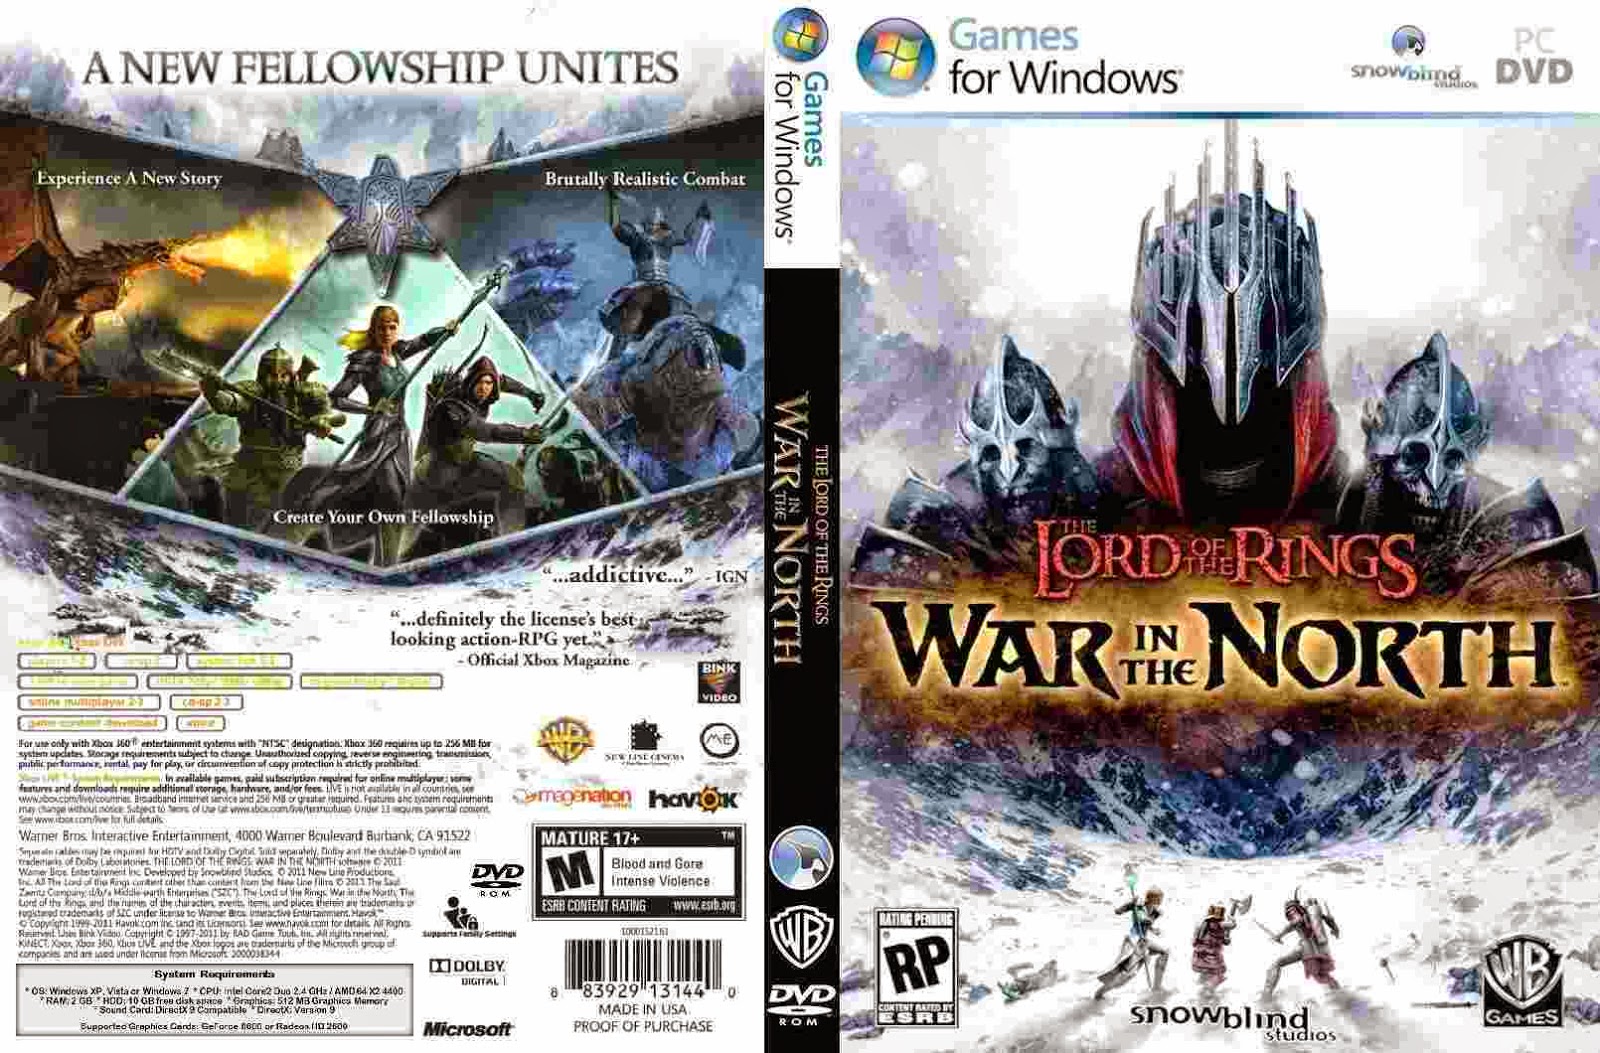 Lord of the rings war in the north купить ключ steam фото 48